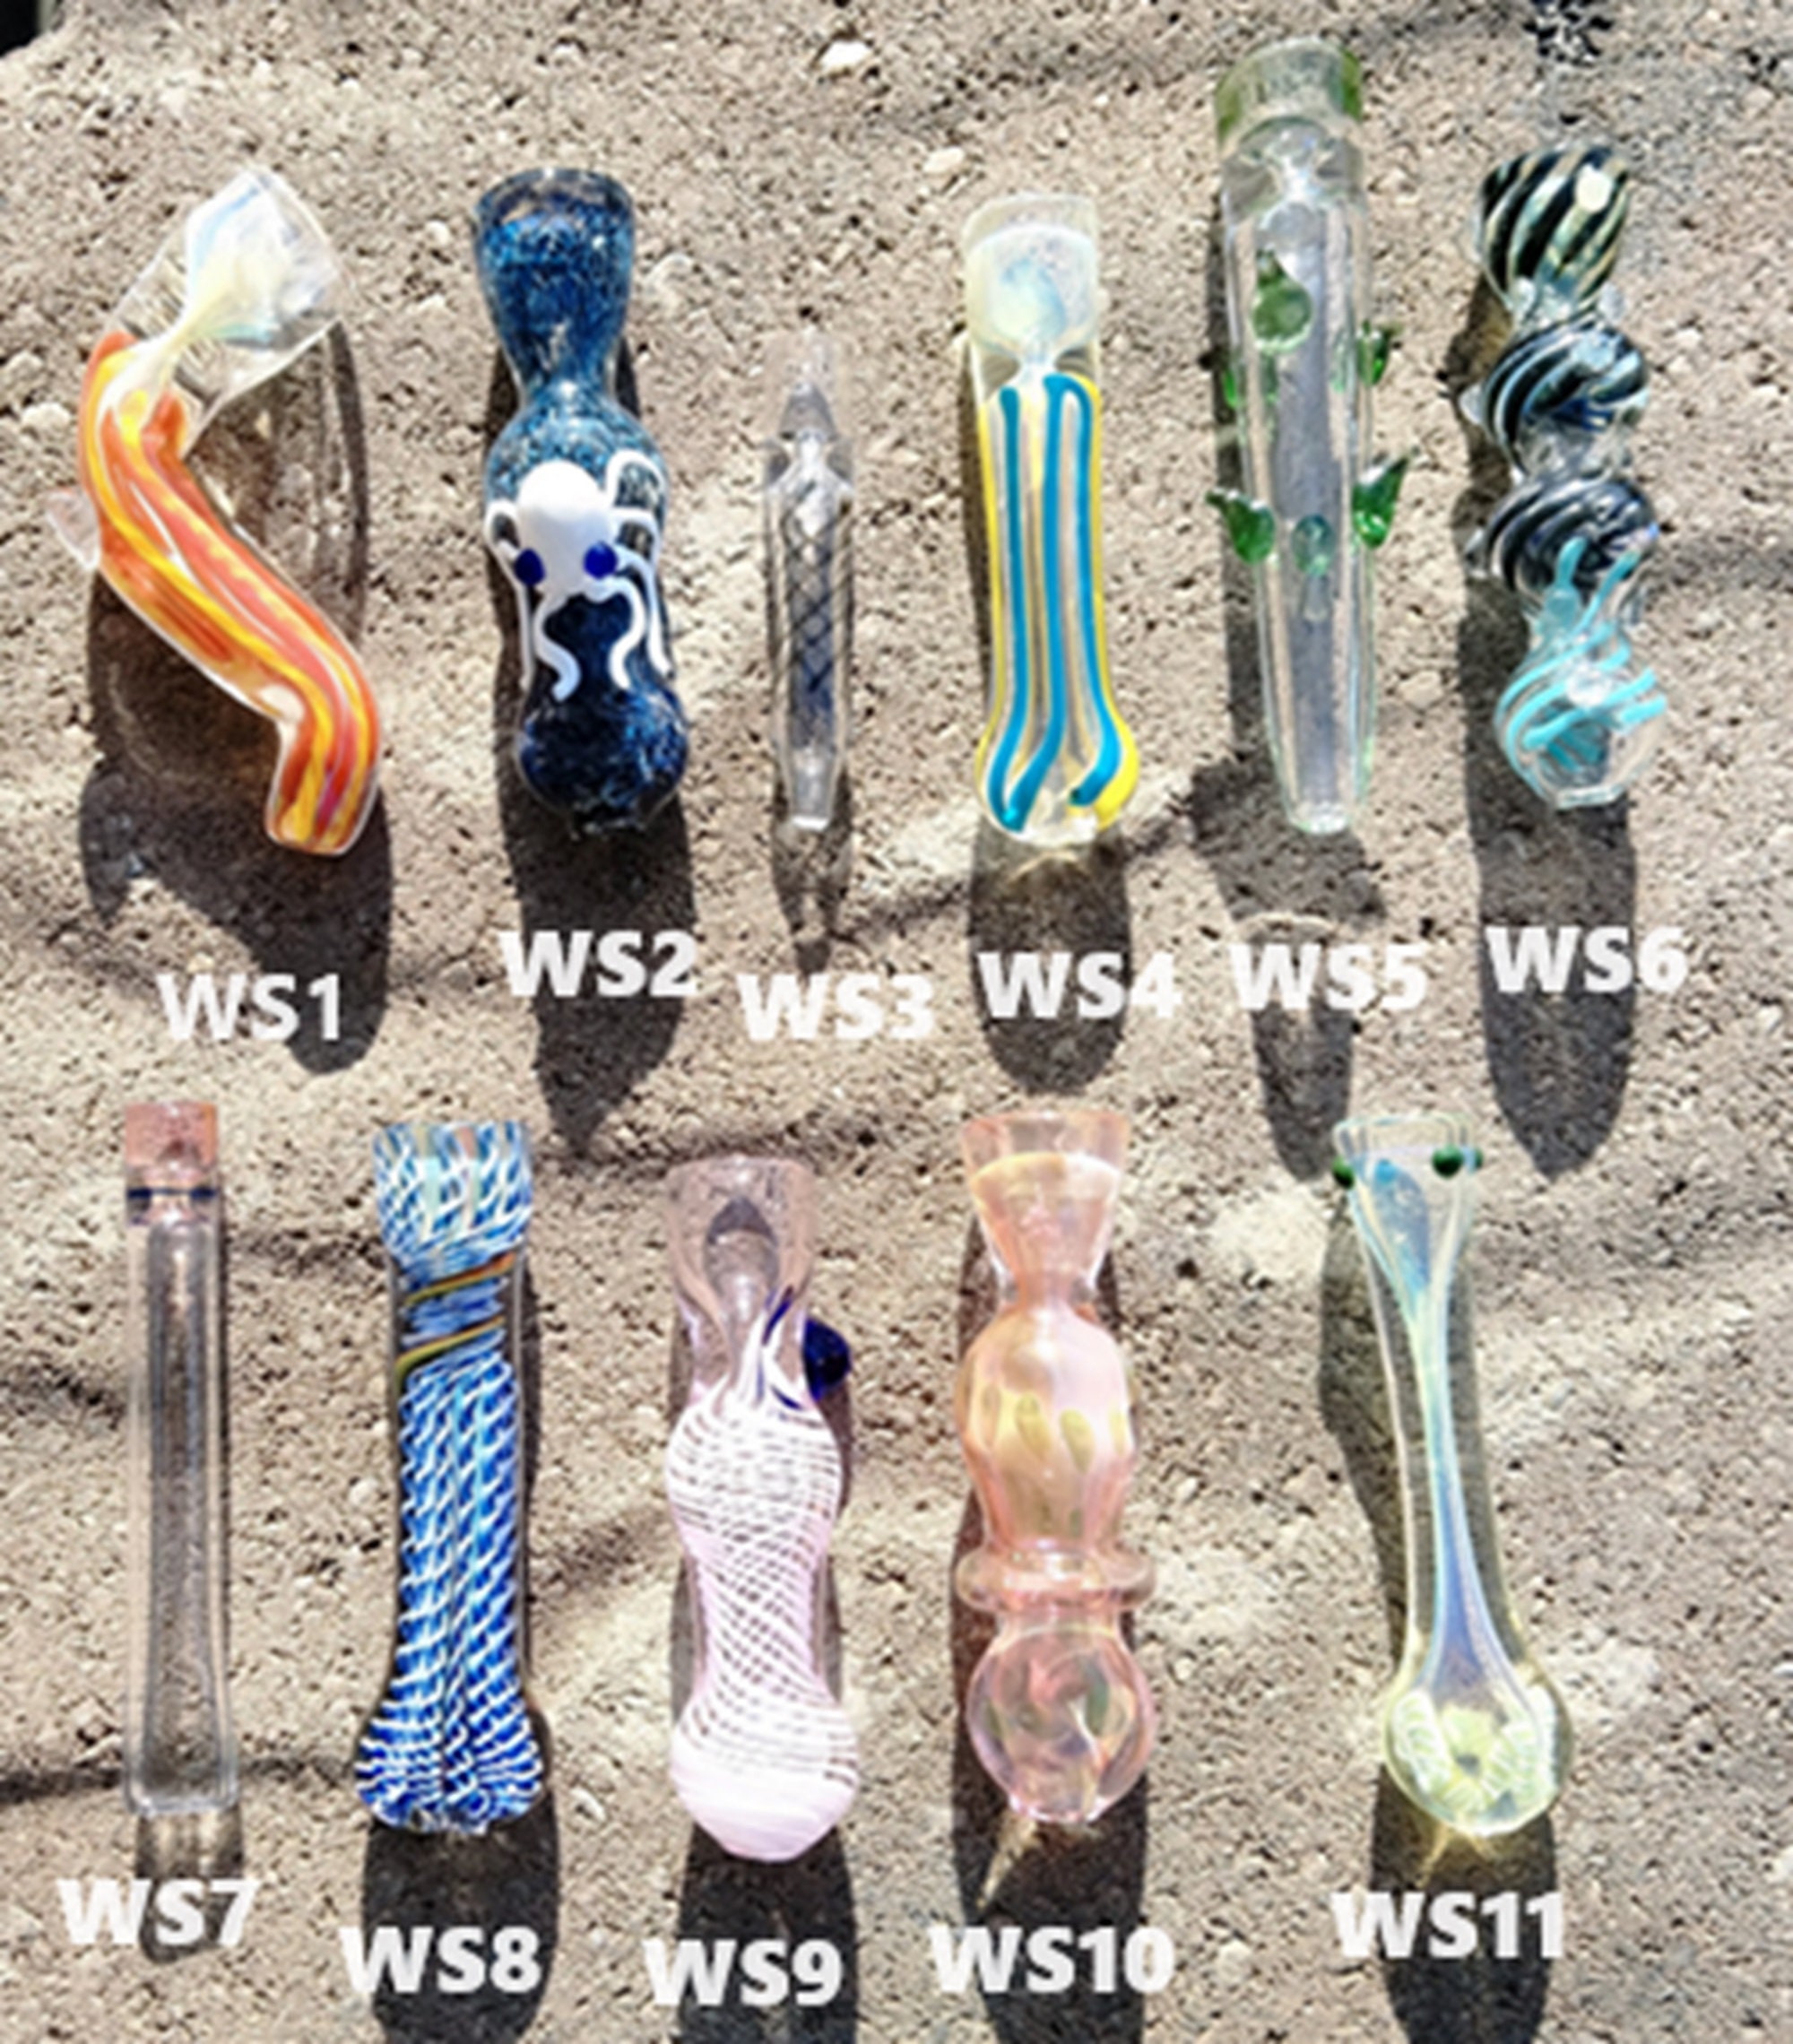 5pcs Thick Glass Tobacco Glass Pipes Reusable One Hitter Smoking